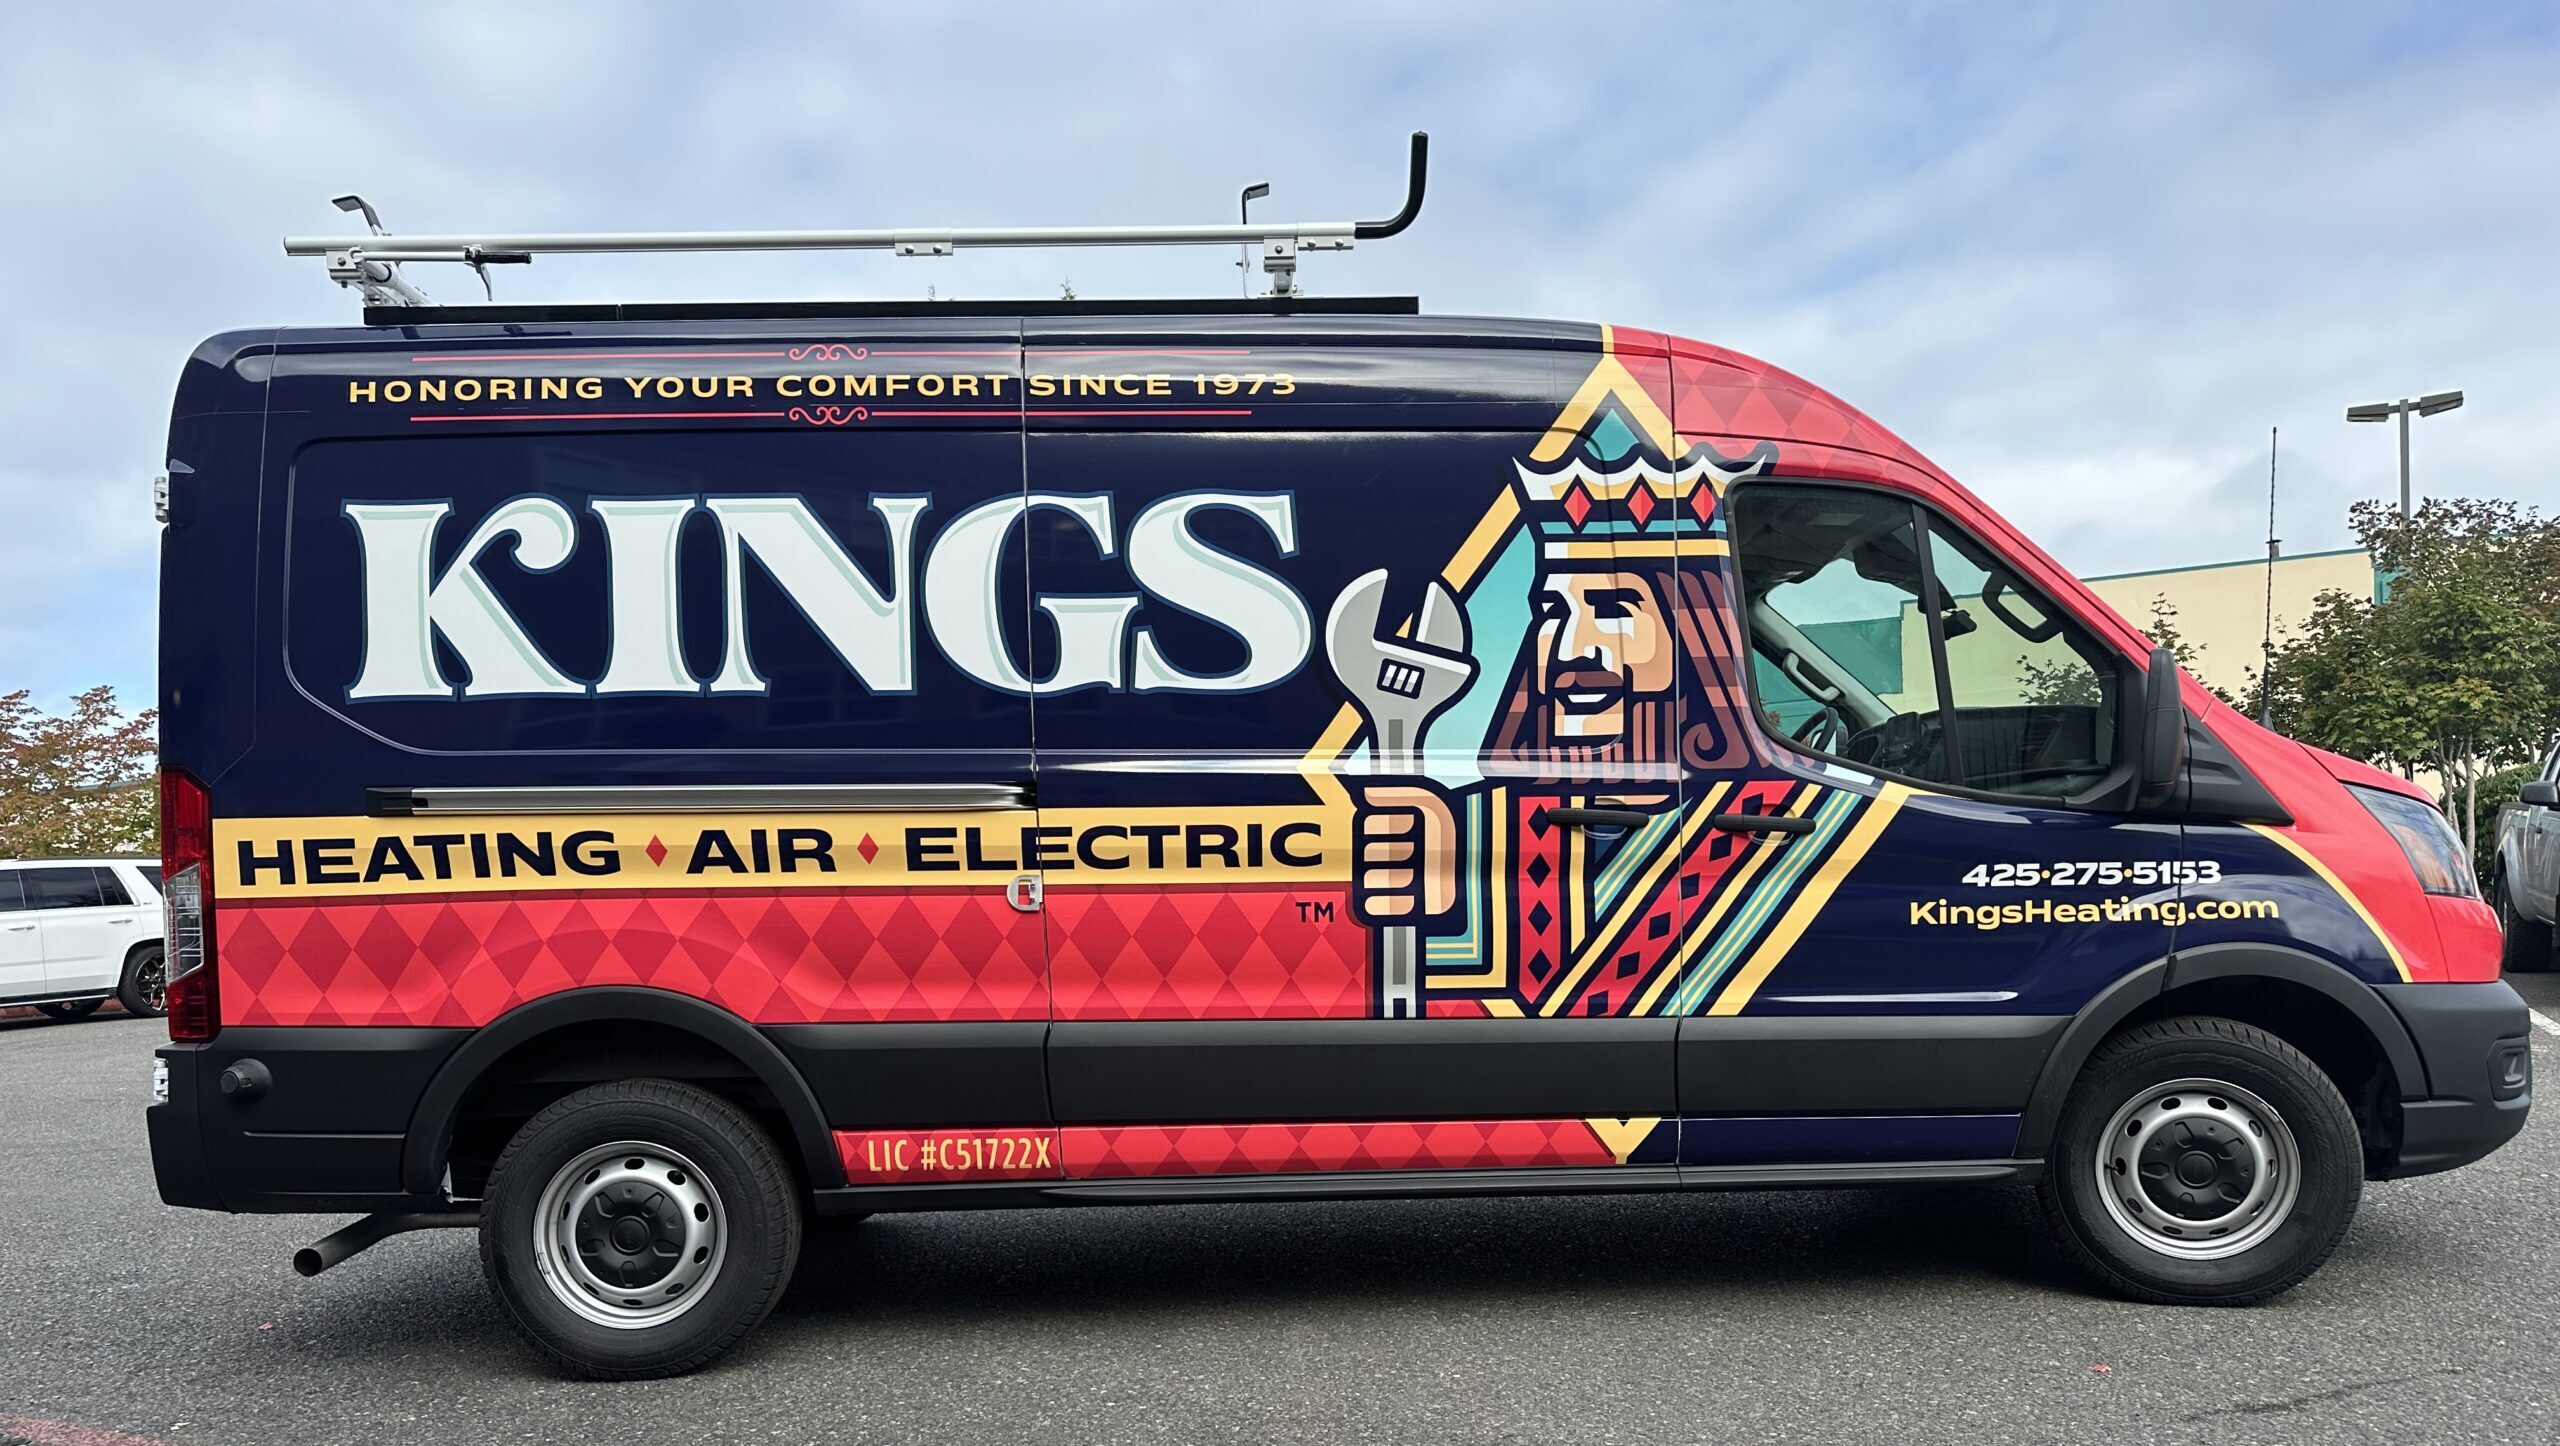 Kings Heating and Air Conditioning Vehicle Wrap